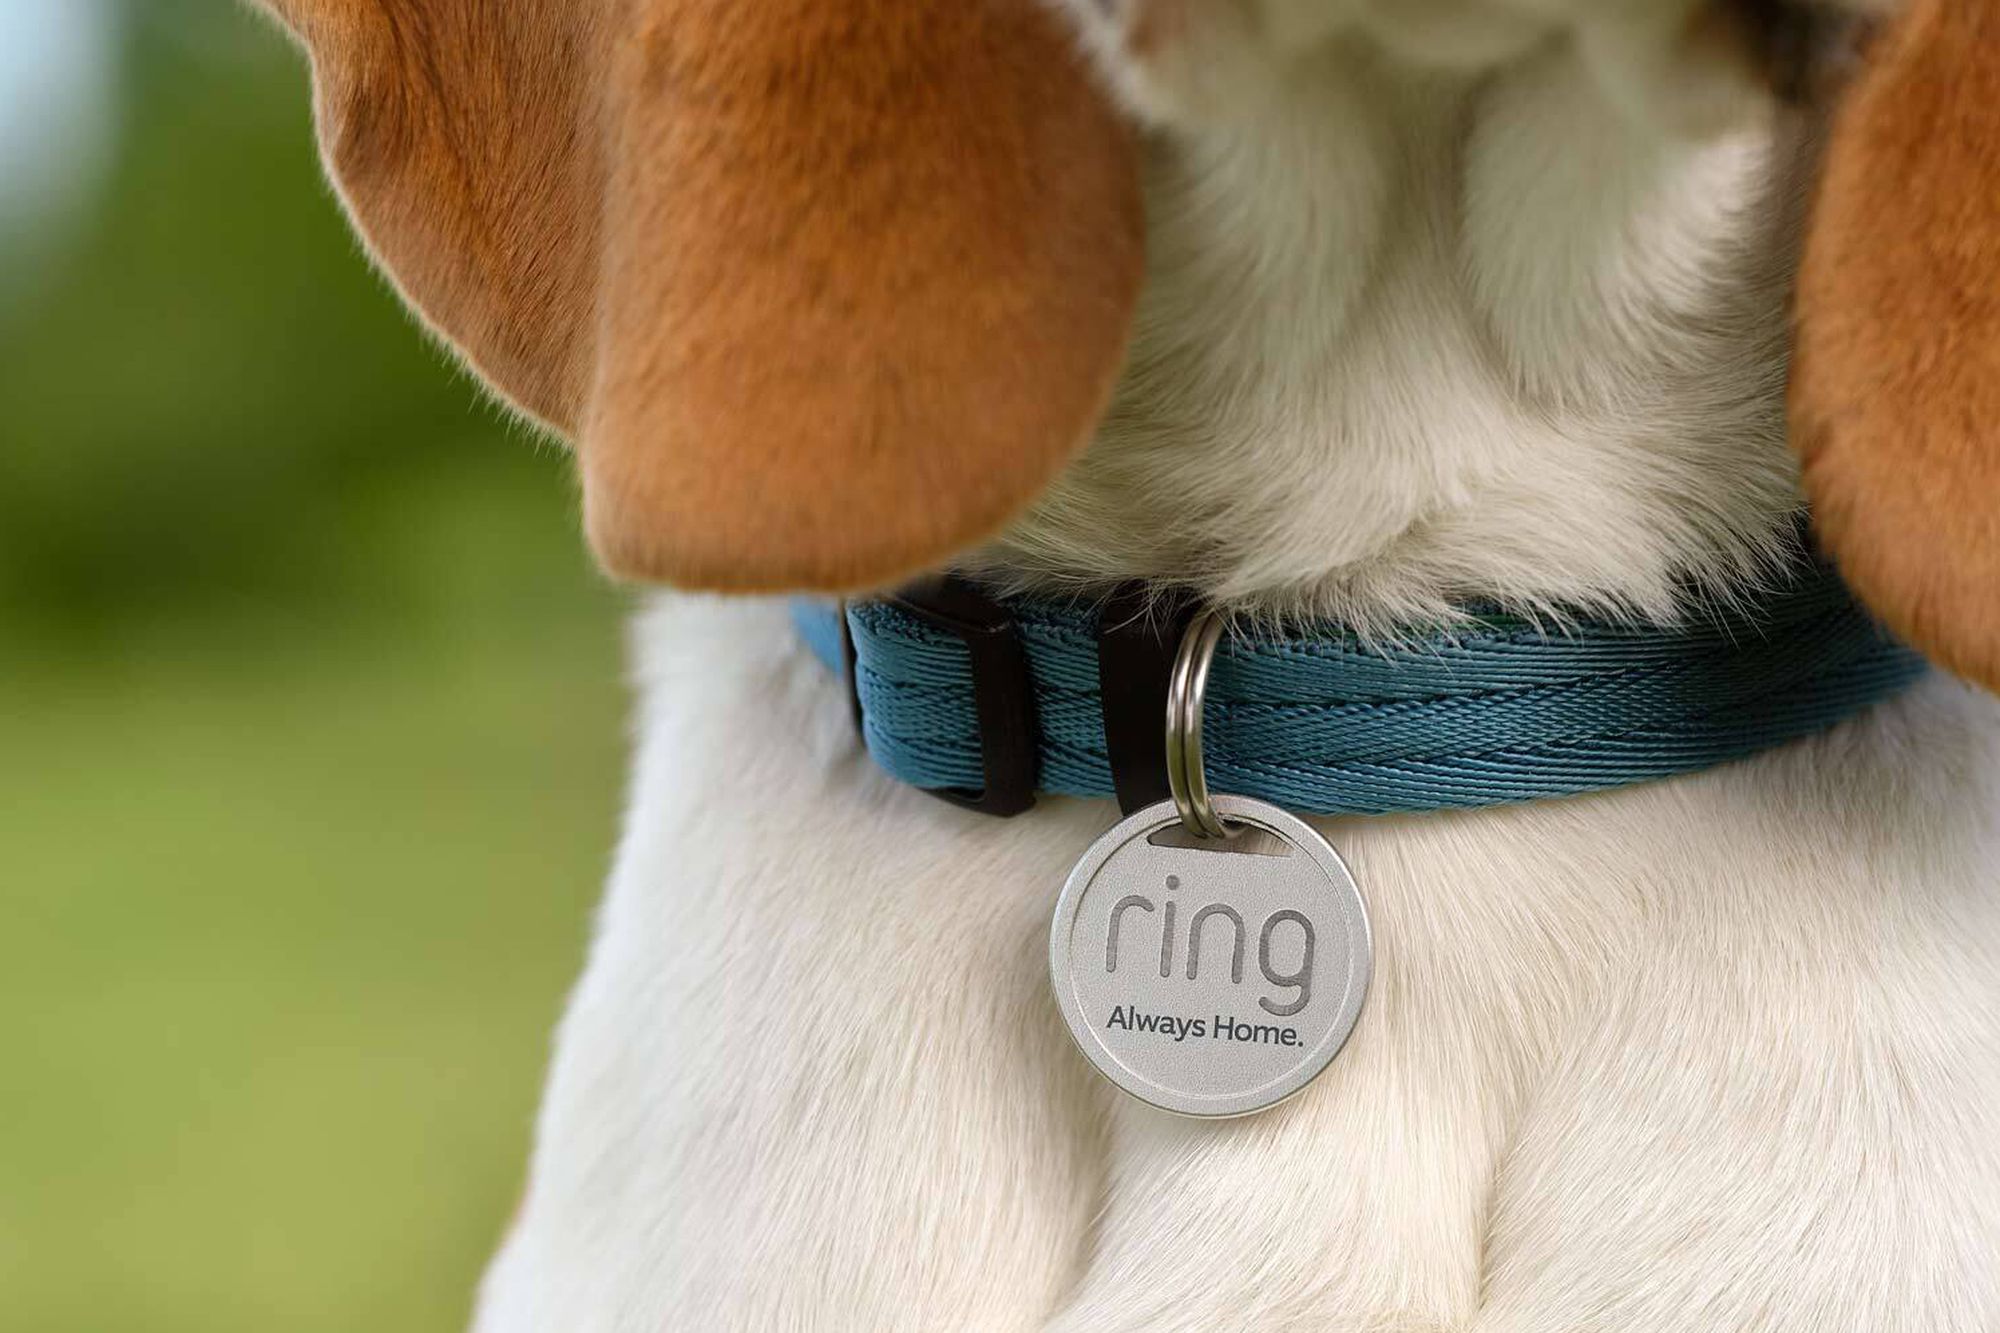 Ring's new Pet Tag puts a QR code on your dog or cat's collar to